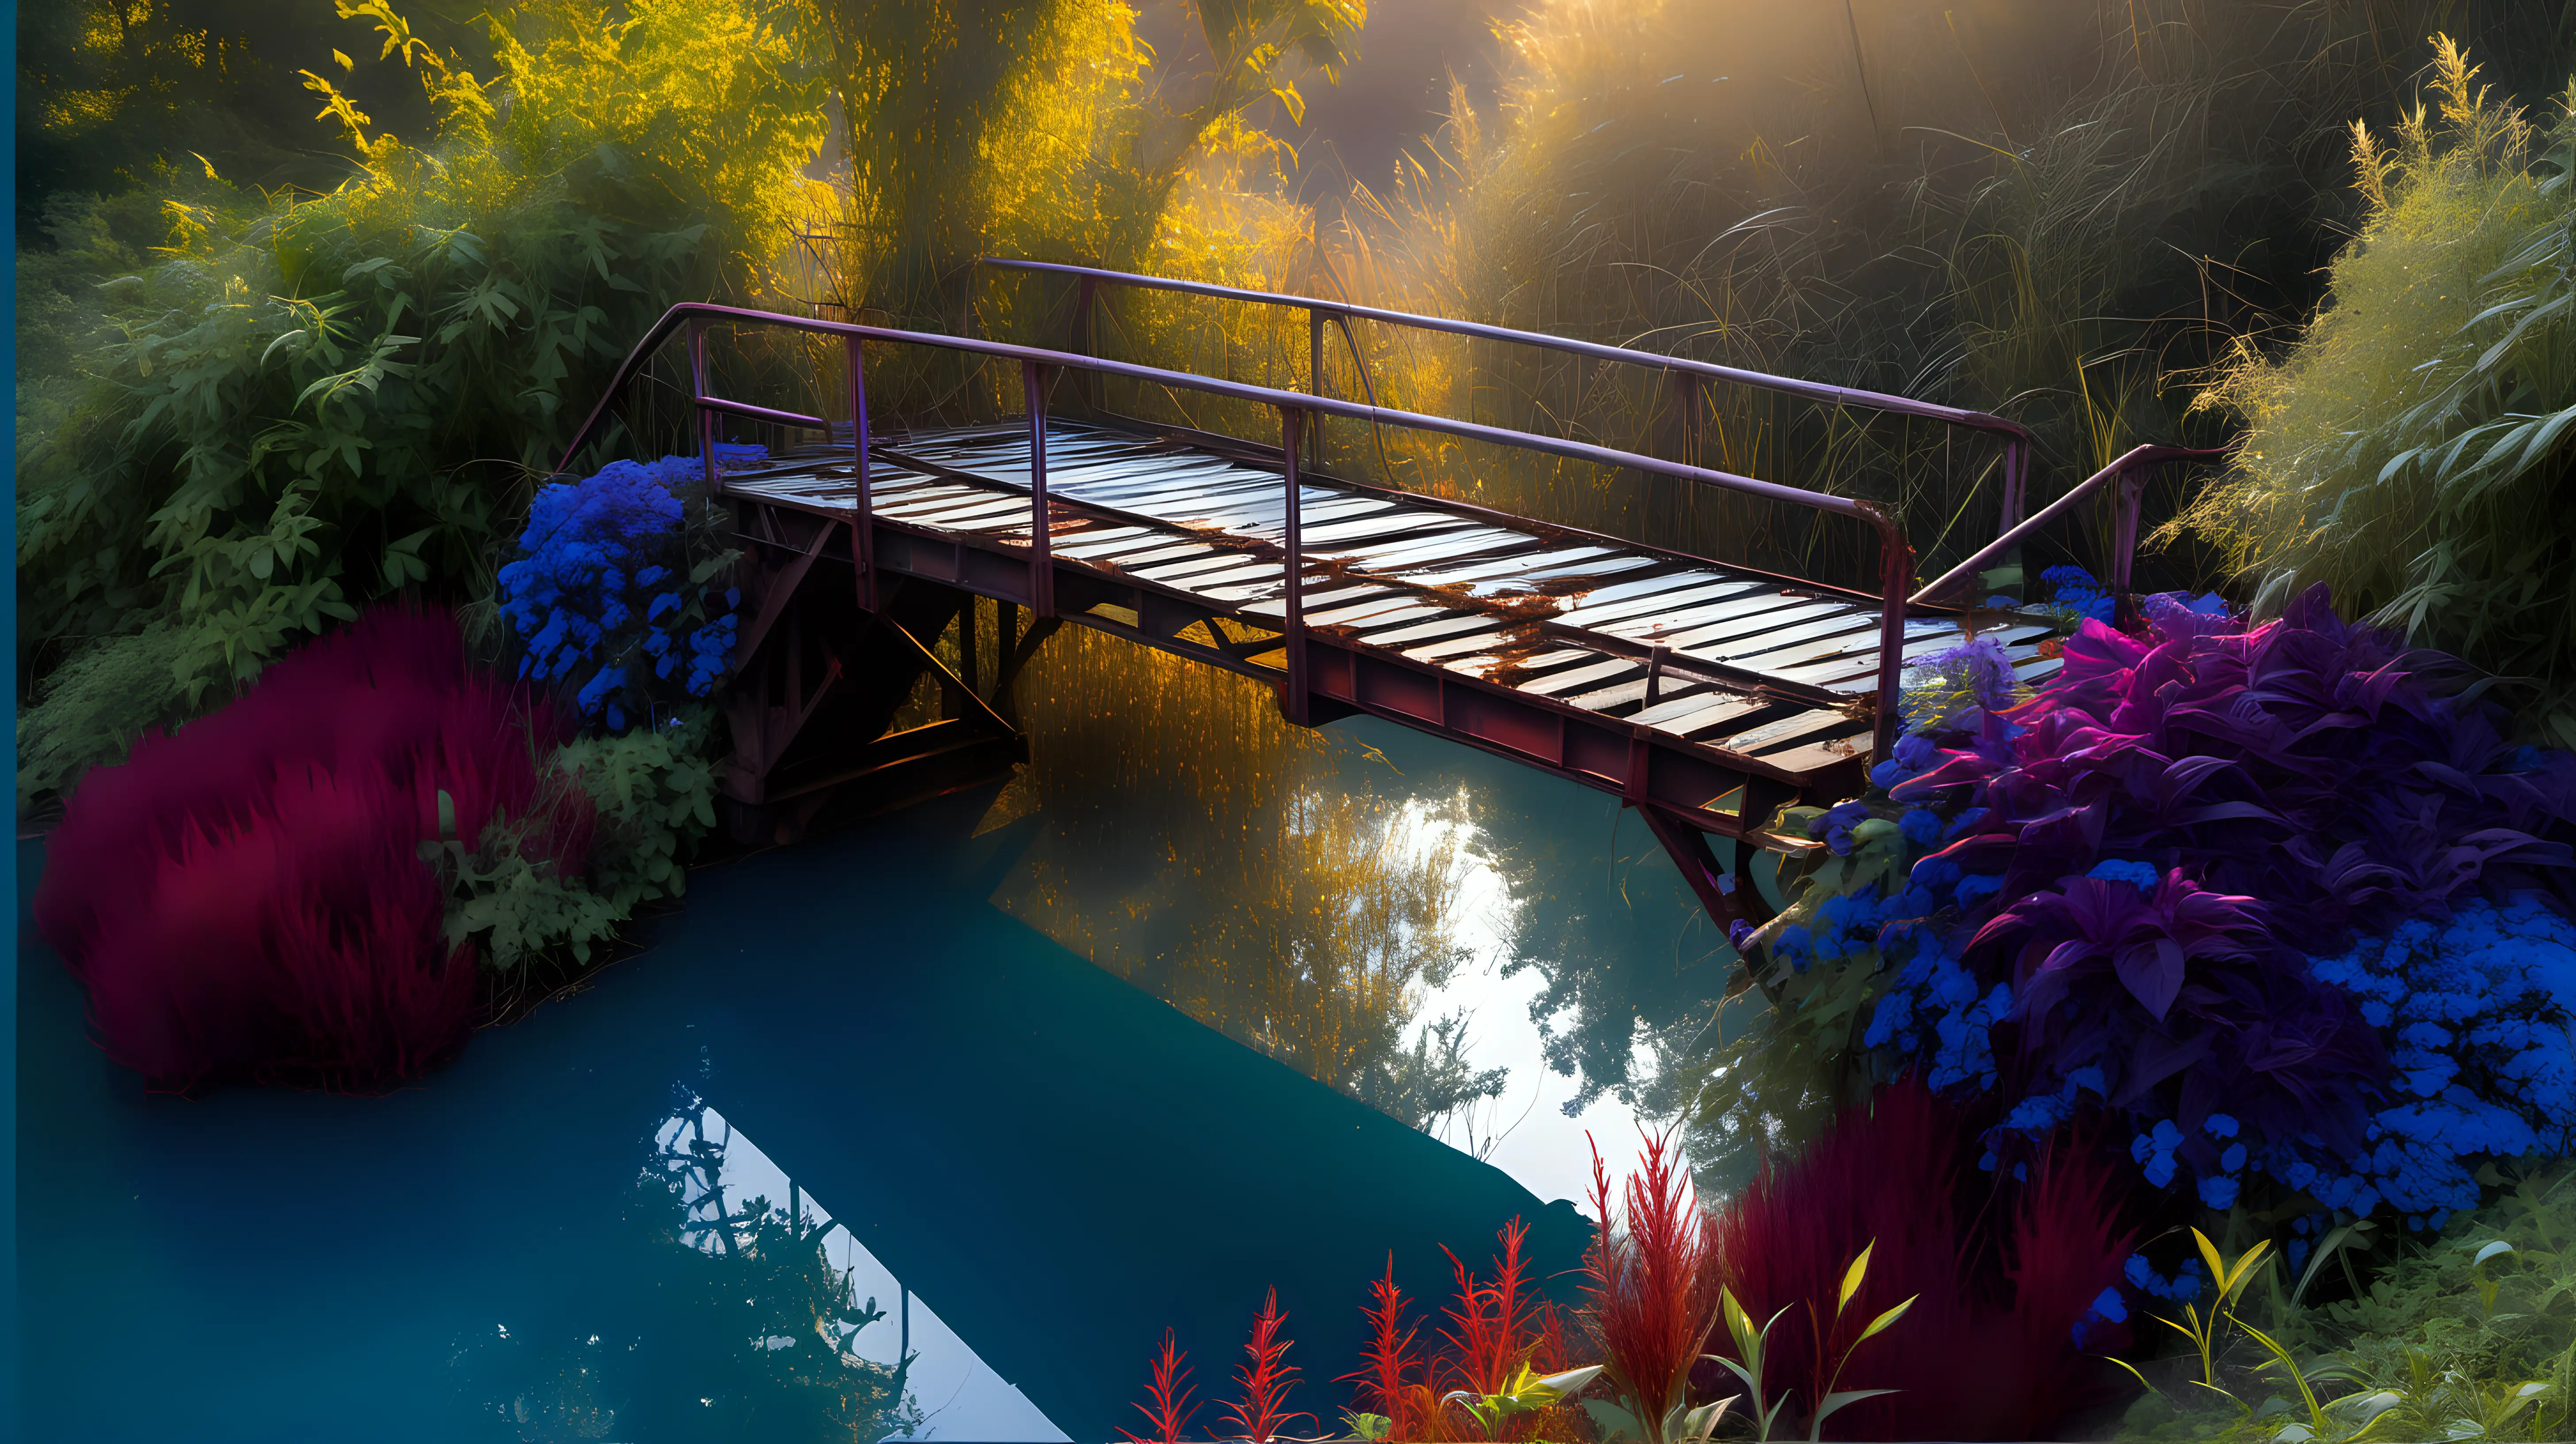 Sunlit Old Rusty Bridge Over Blue Waters with Colorful Garden Plants